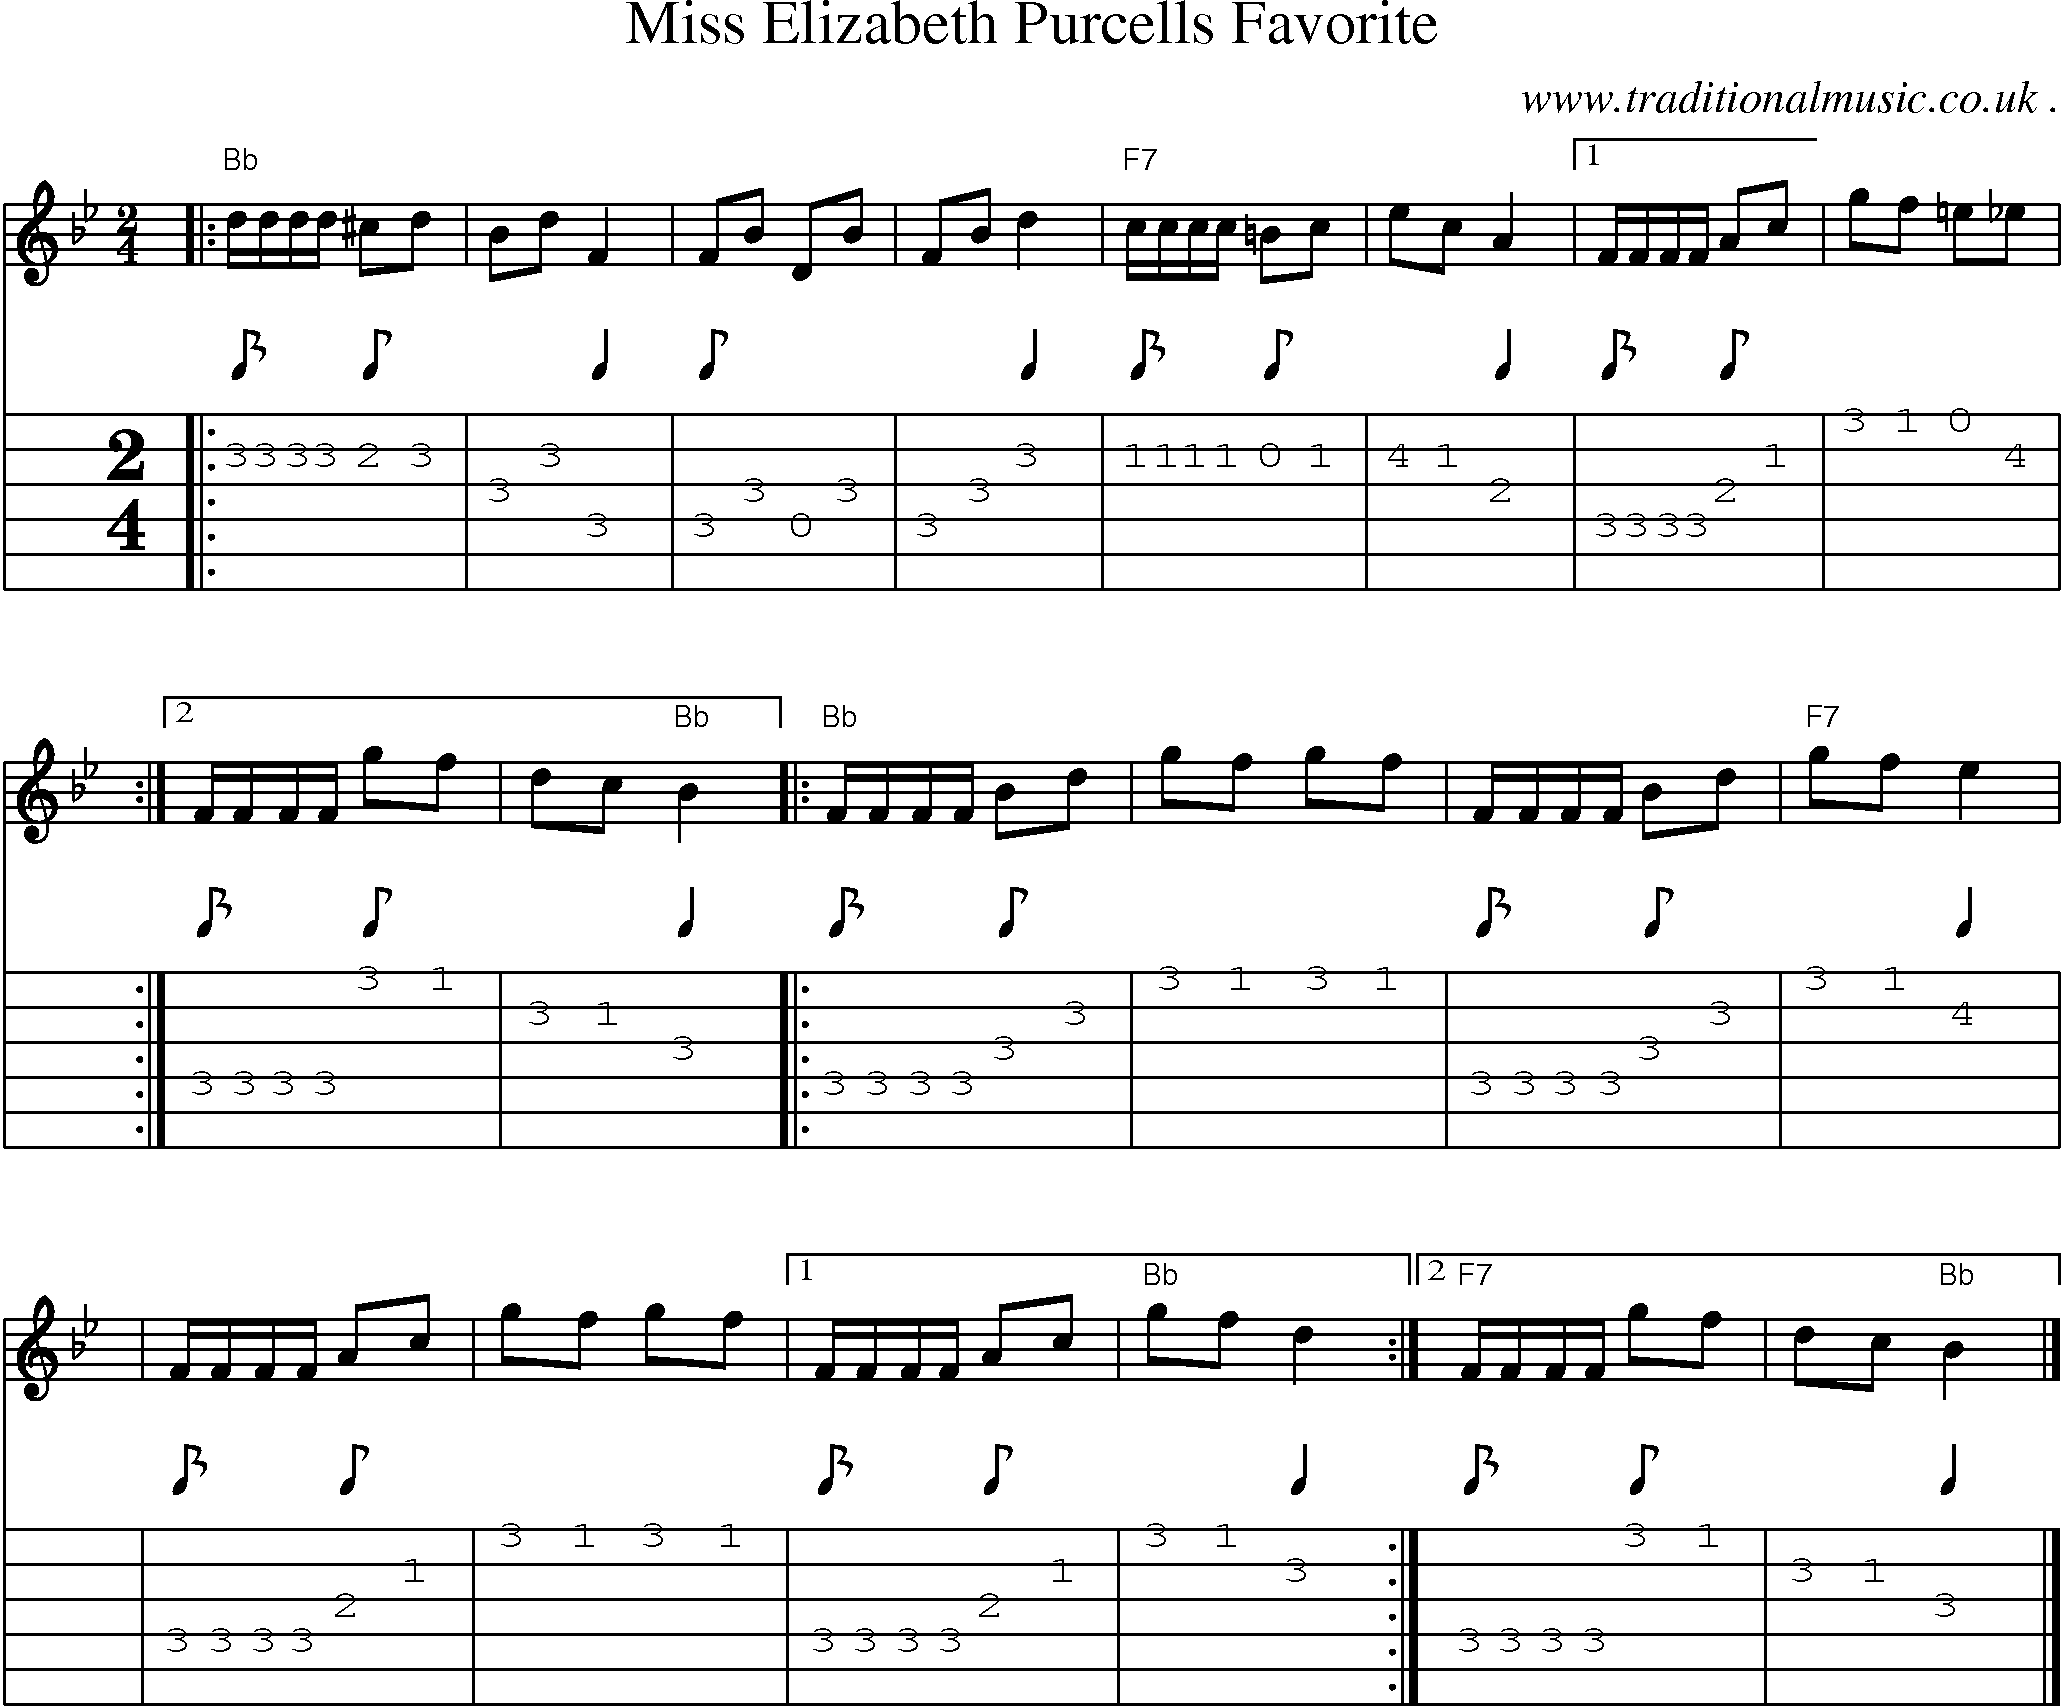 Sheet-music  score, Chords and Guitar Tabs for Miss Elizabeth Purcells Favorite